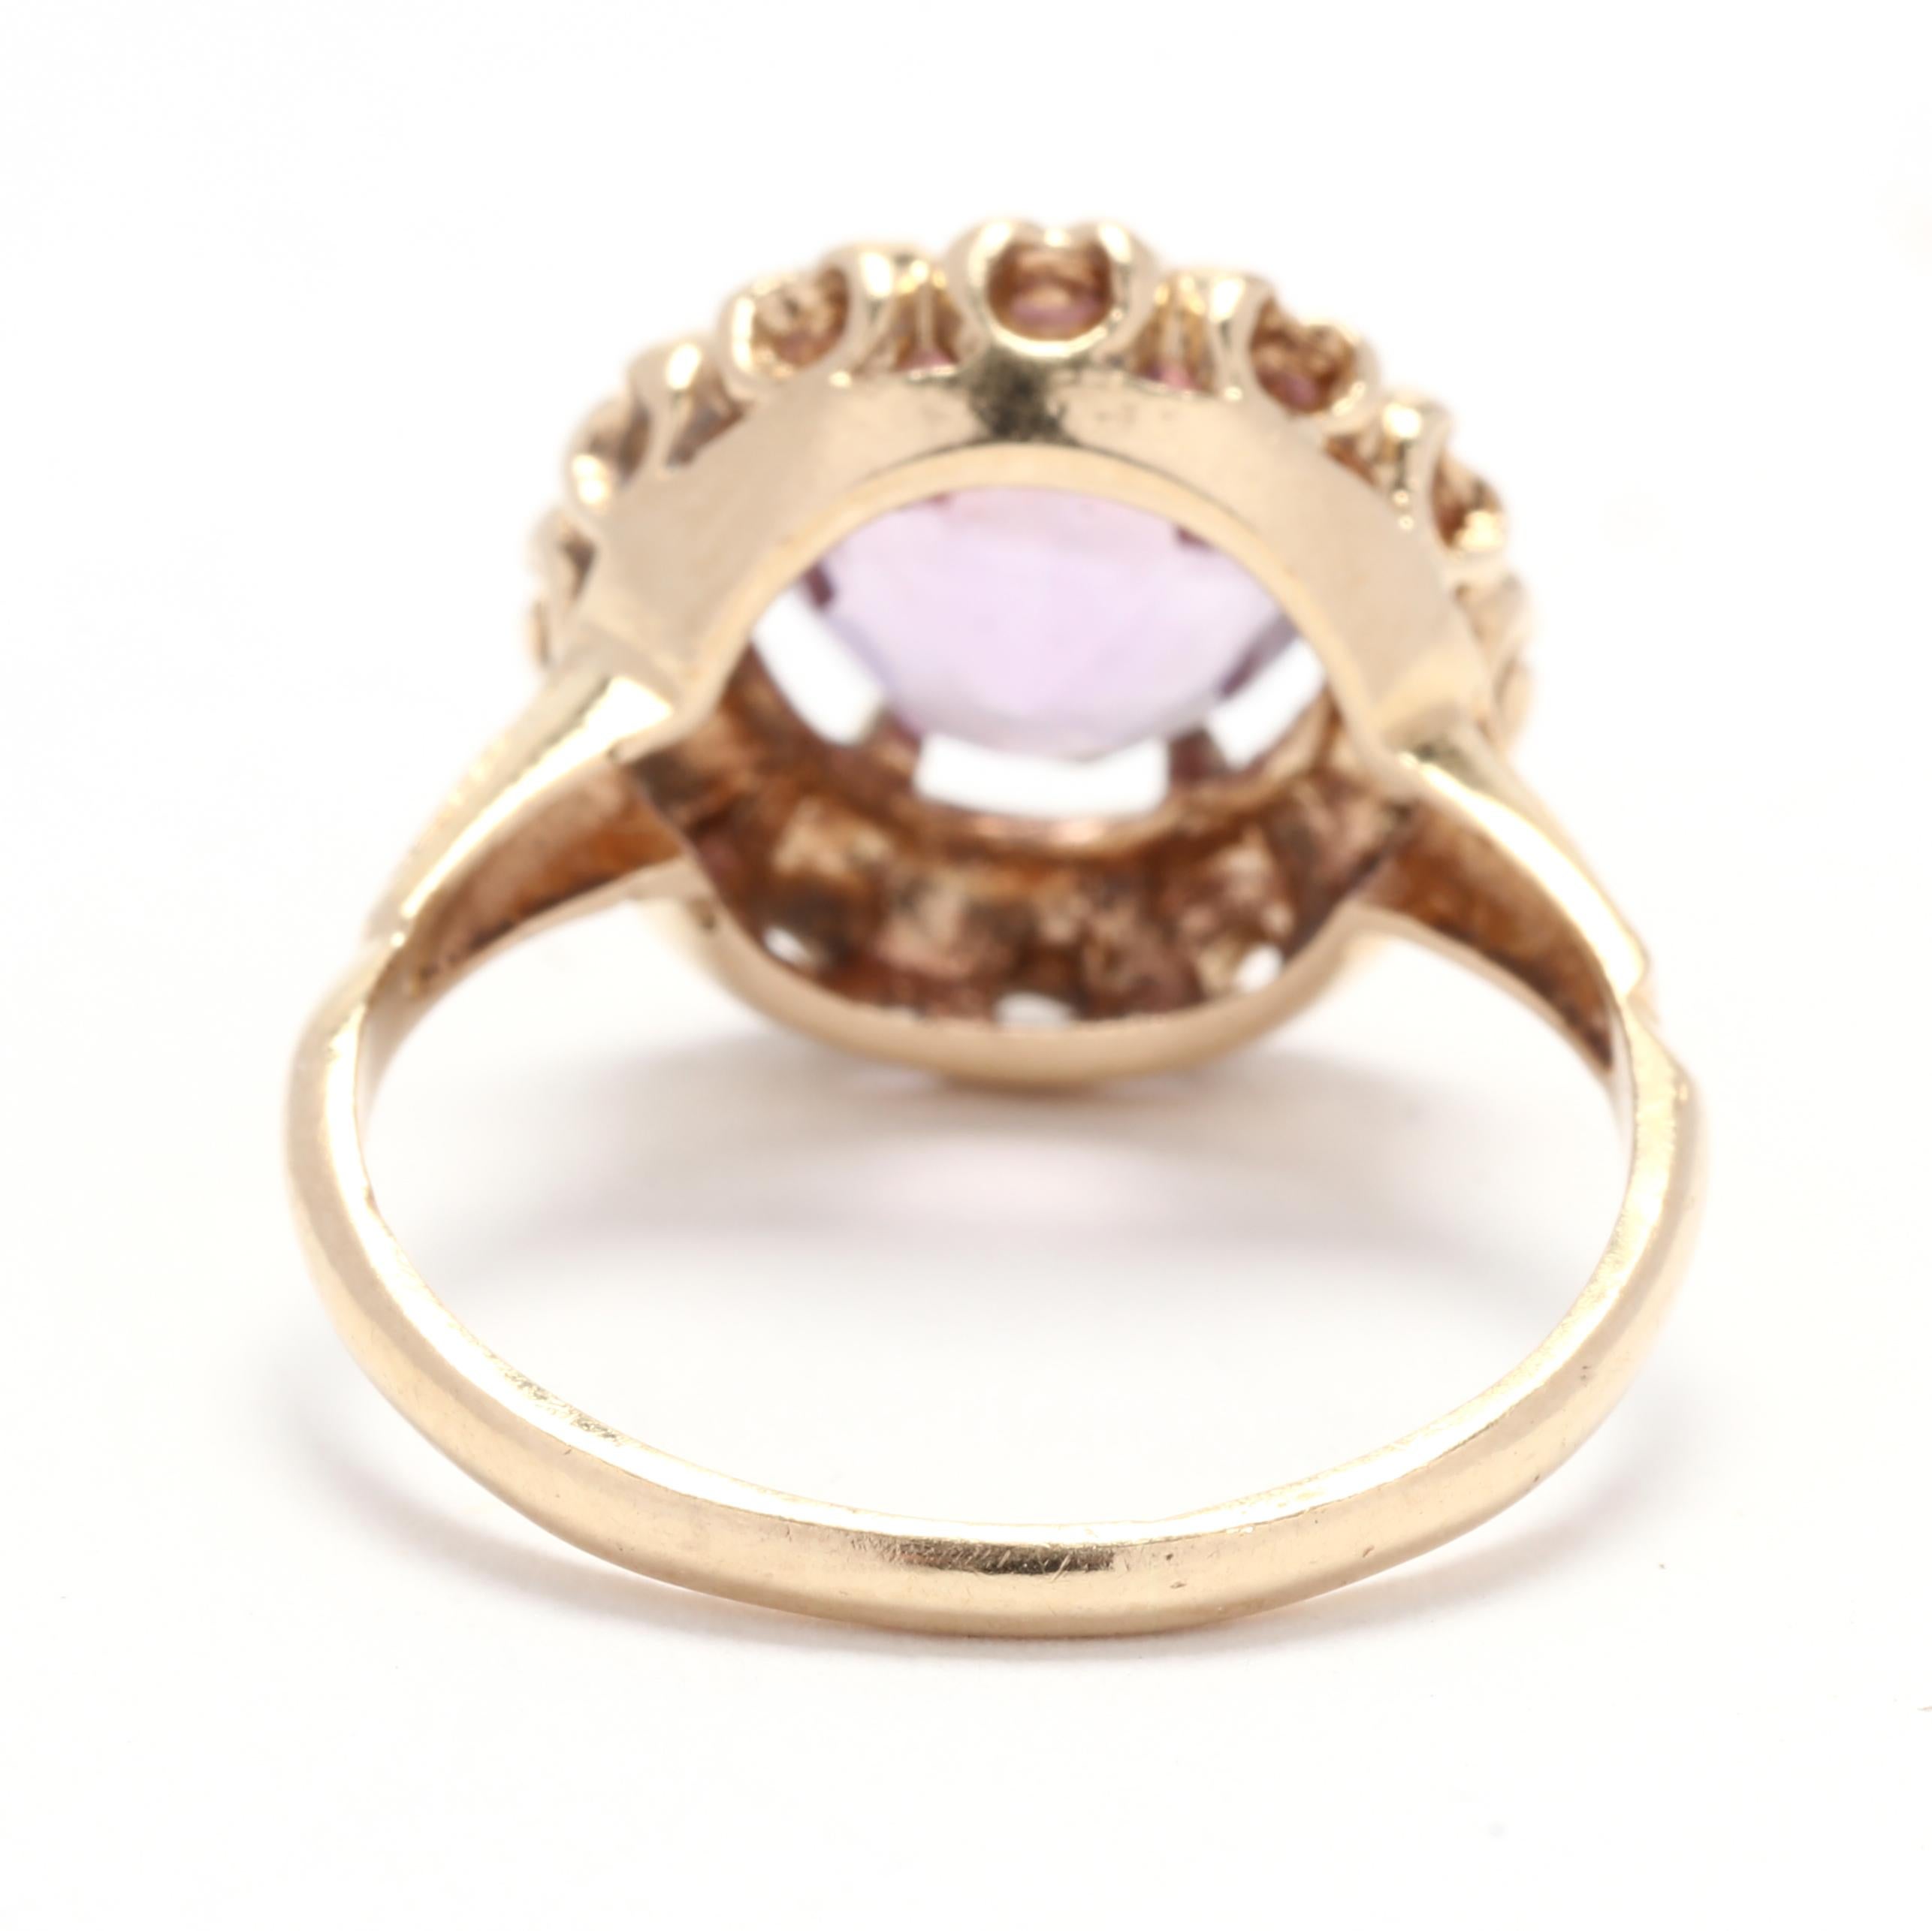 Round Cut 1.50ct Amethyst Flower Halo Ring, 14K Yellow Gold, Ring Size 5.5, Vintage Ring